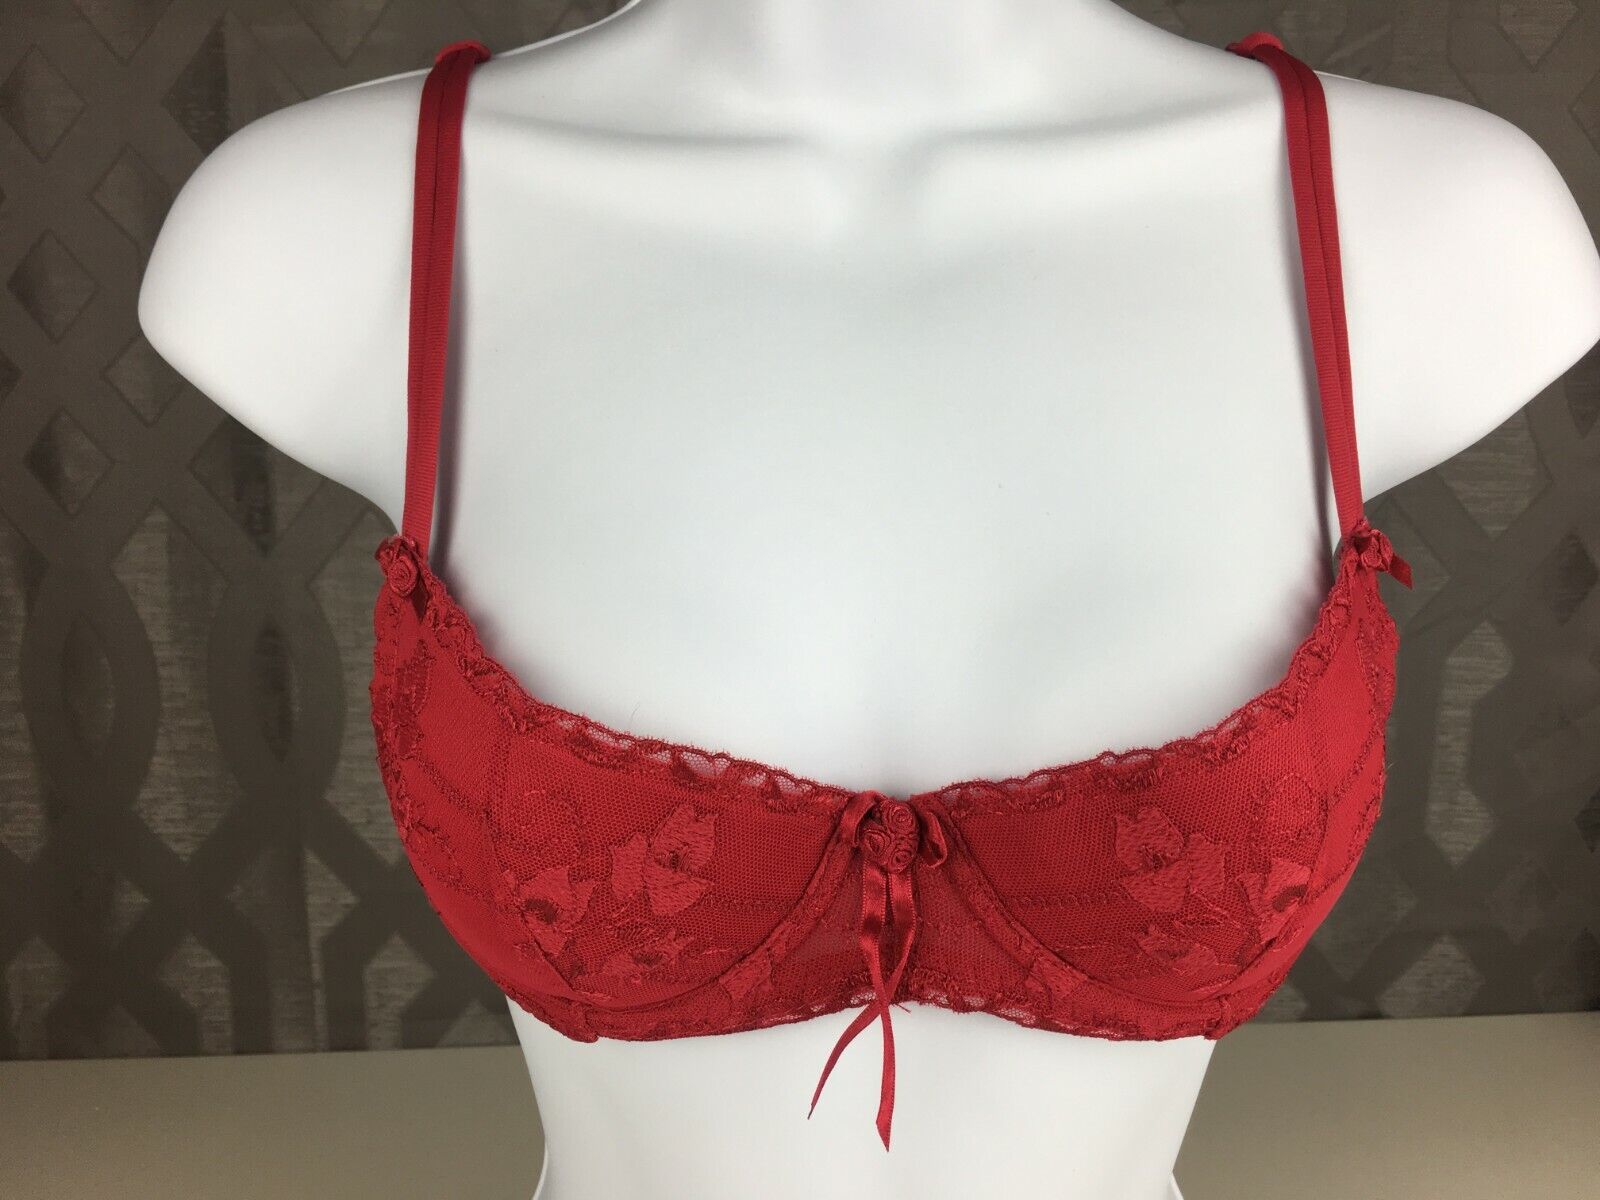 Alegro Embroidered Lace Underwire Sexy Lingerie Bra - Red 9021 NWT  Size 30-40